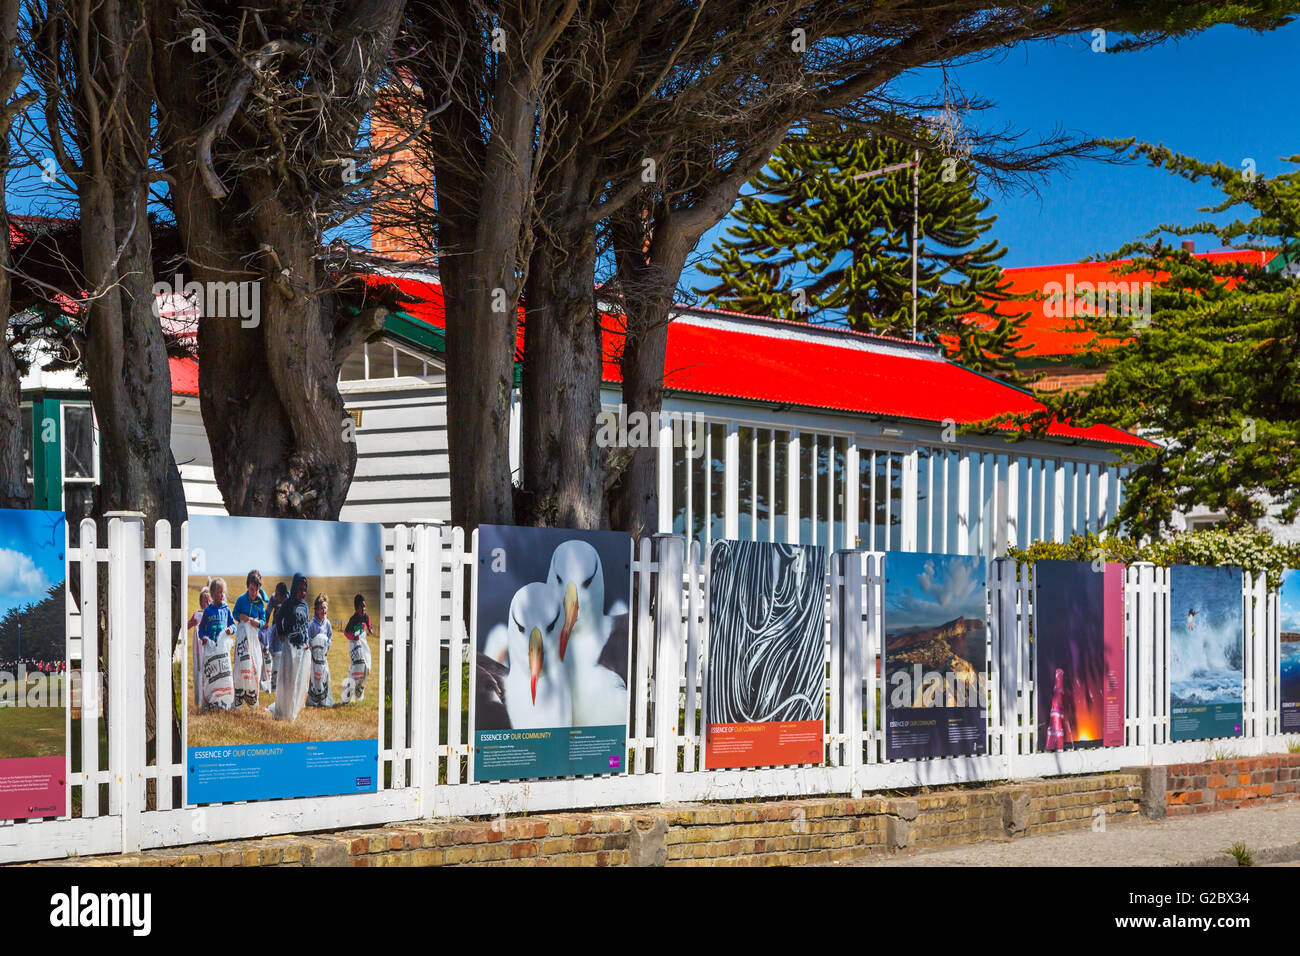 Artwork of local attractions displayed on the  streets of Stanley, East Falkland, Falkland Islands, British Overseas Territory. Stock Photo